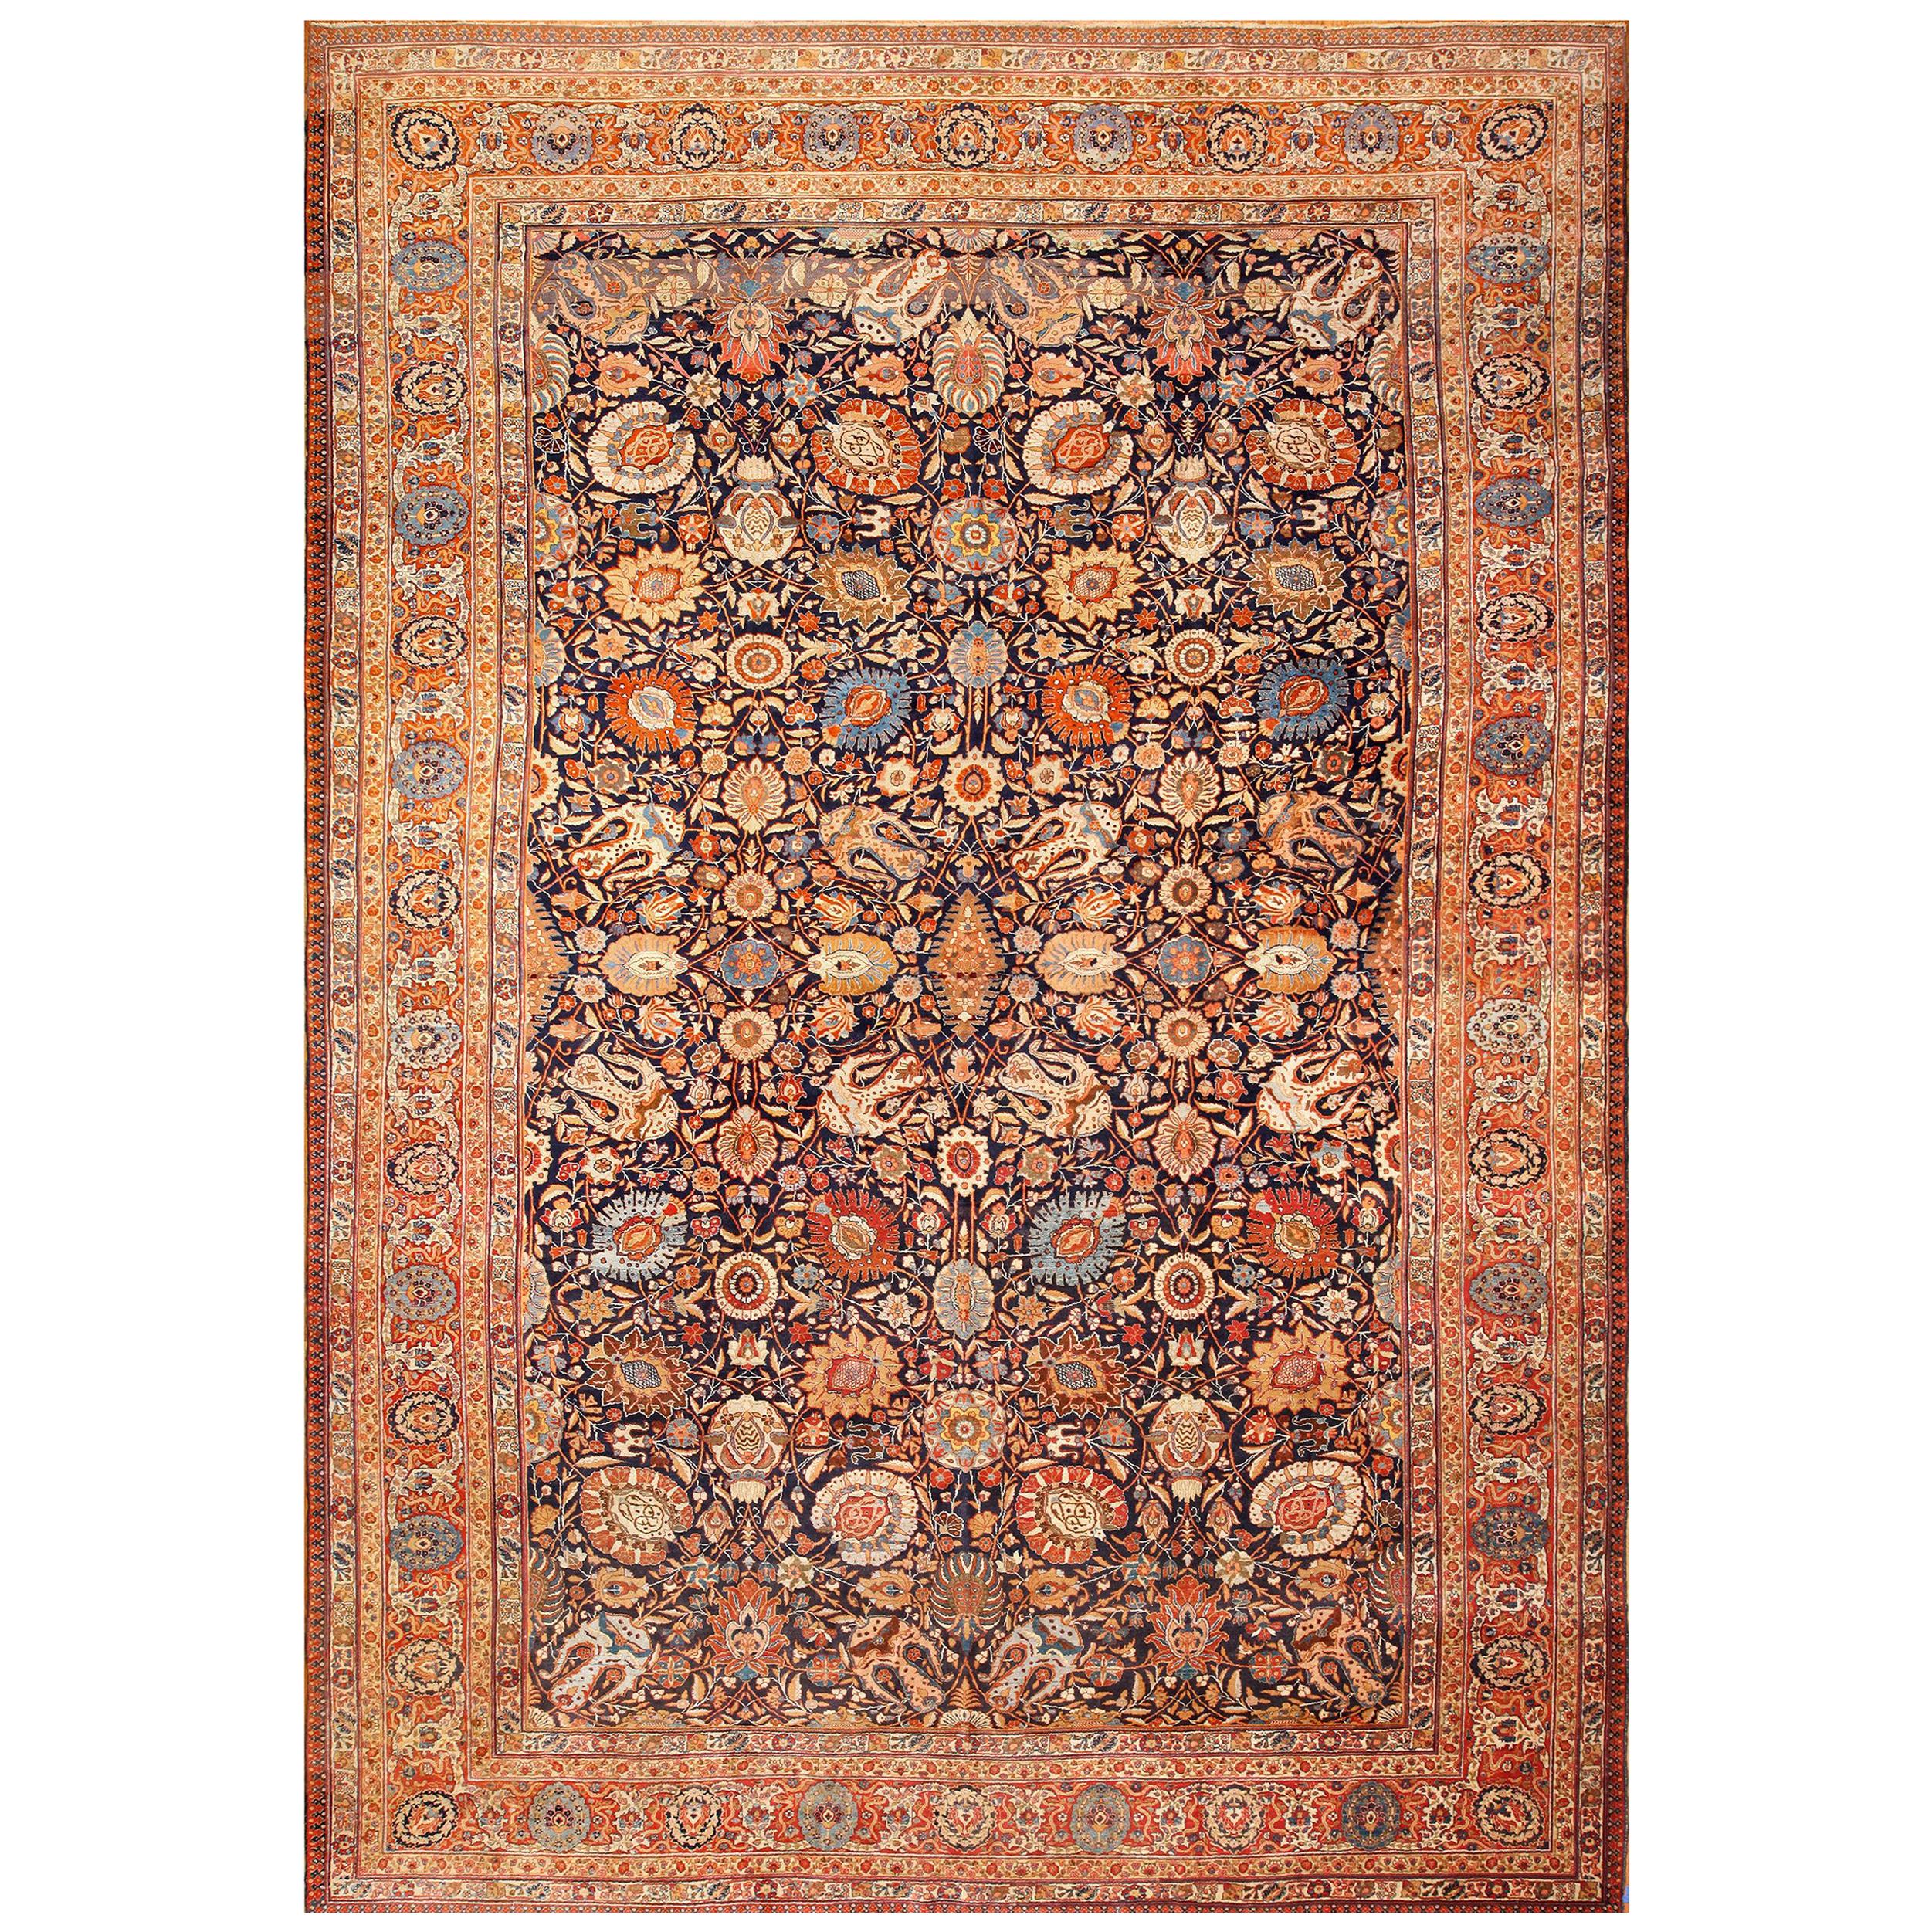 Nazmiyal Collection Antique Persian Tabriz Rug. Size: 14 ft 8 in x 22 ft 